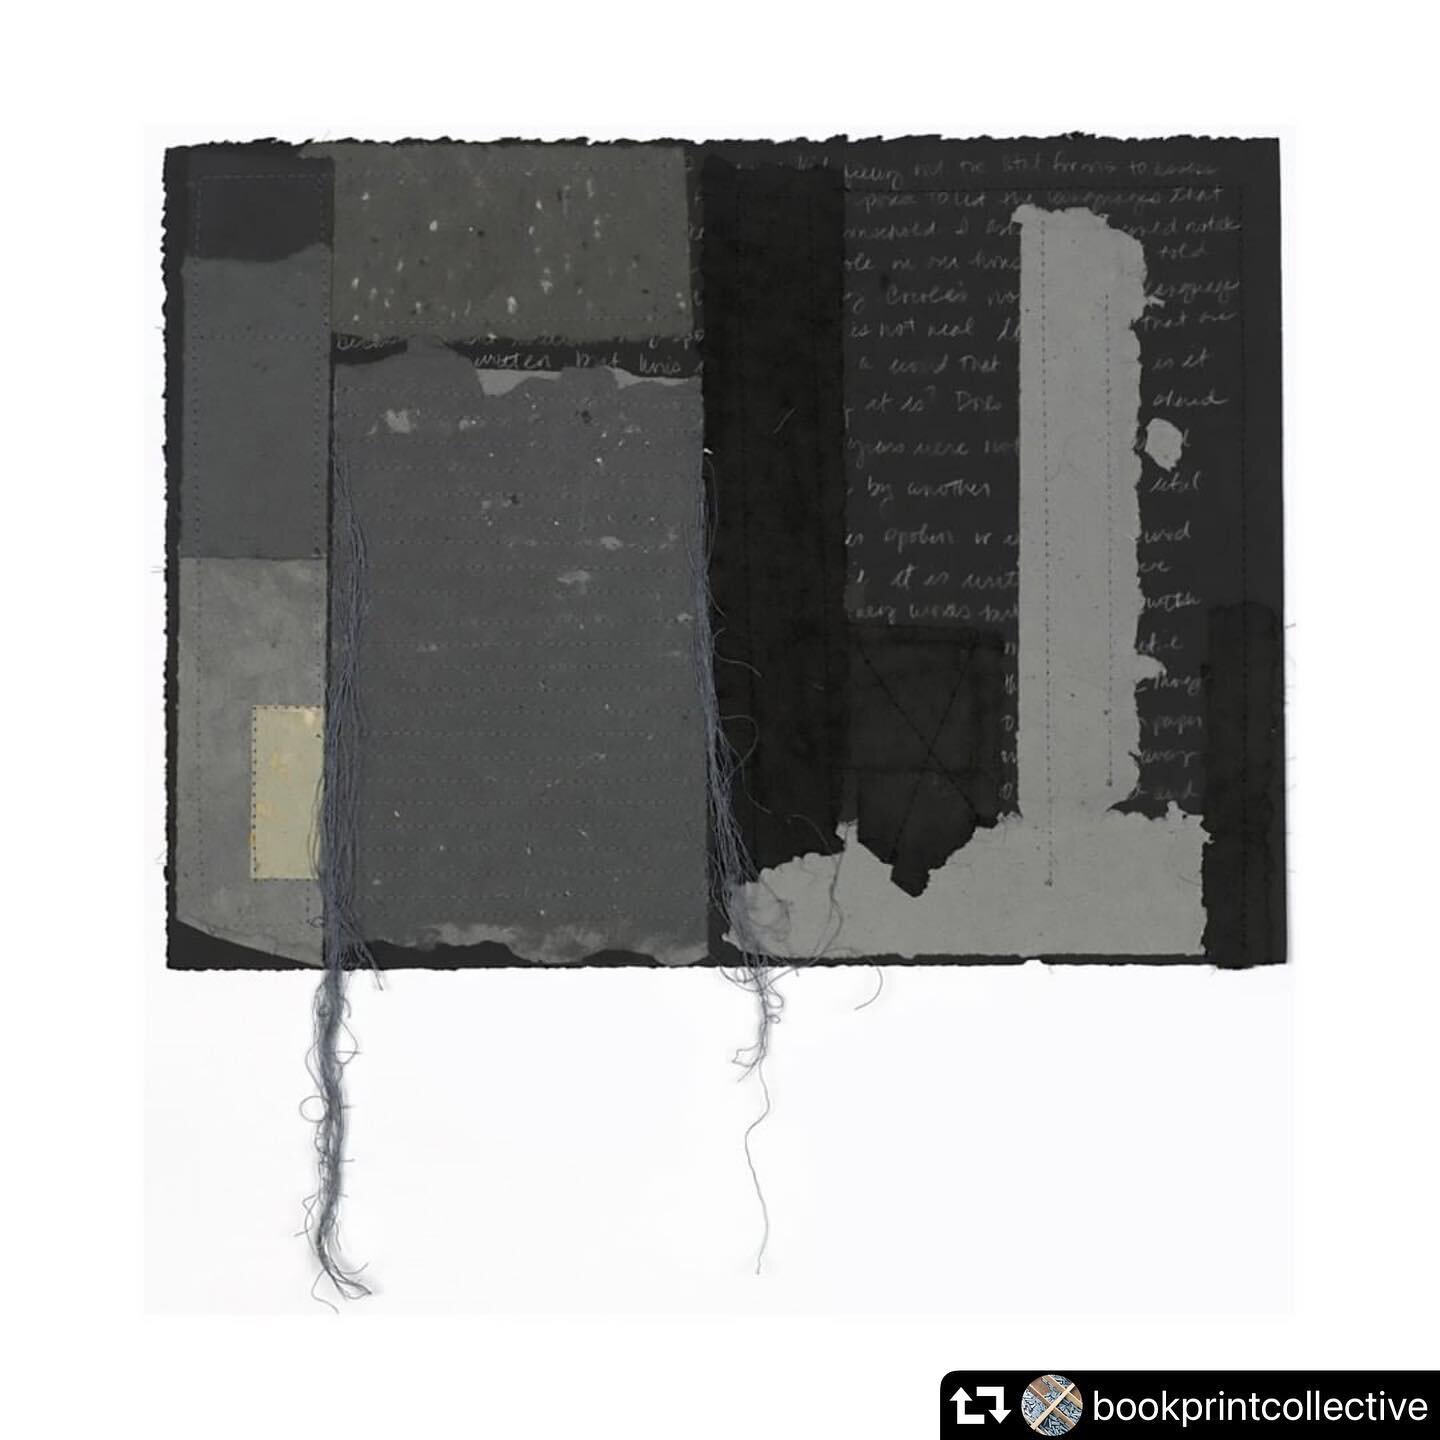 Takeover day2 @bookprintcollective  Today&rsquo;s subject &ldquo;A Language Only Spoken.&rdquo; ( also pictured)

@societyofcraft 
A Language Only Spoken - 11&quot;H x 15&quot;W; Handmade paper, hair, thread, graphite

#alisabanks #abanksart #artistb